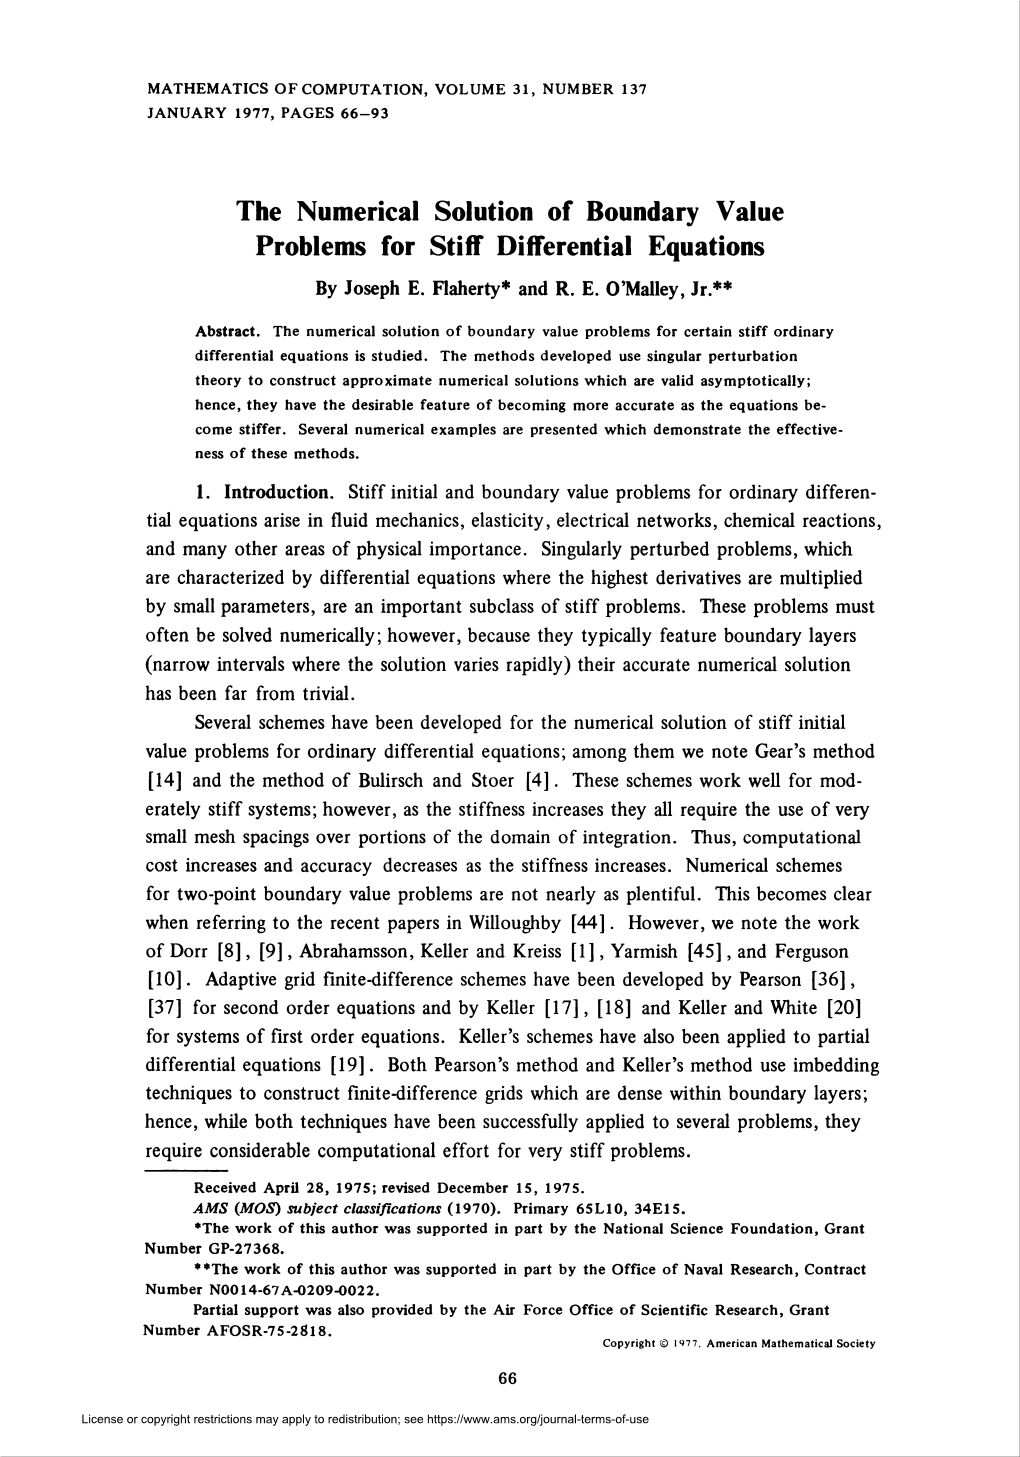 Problems for Stiff Differential Equations by Joseph E